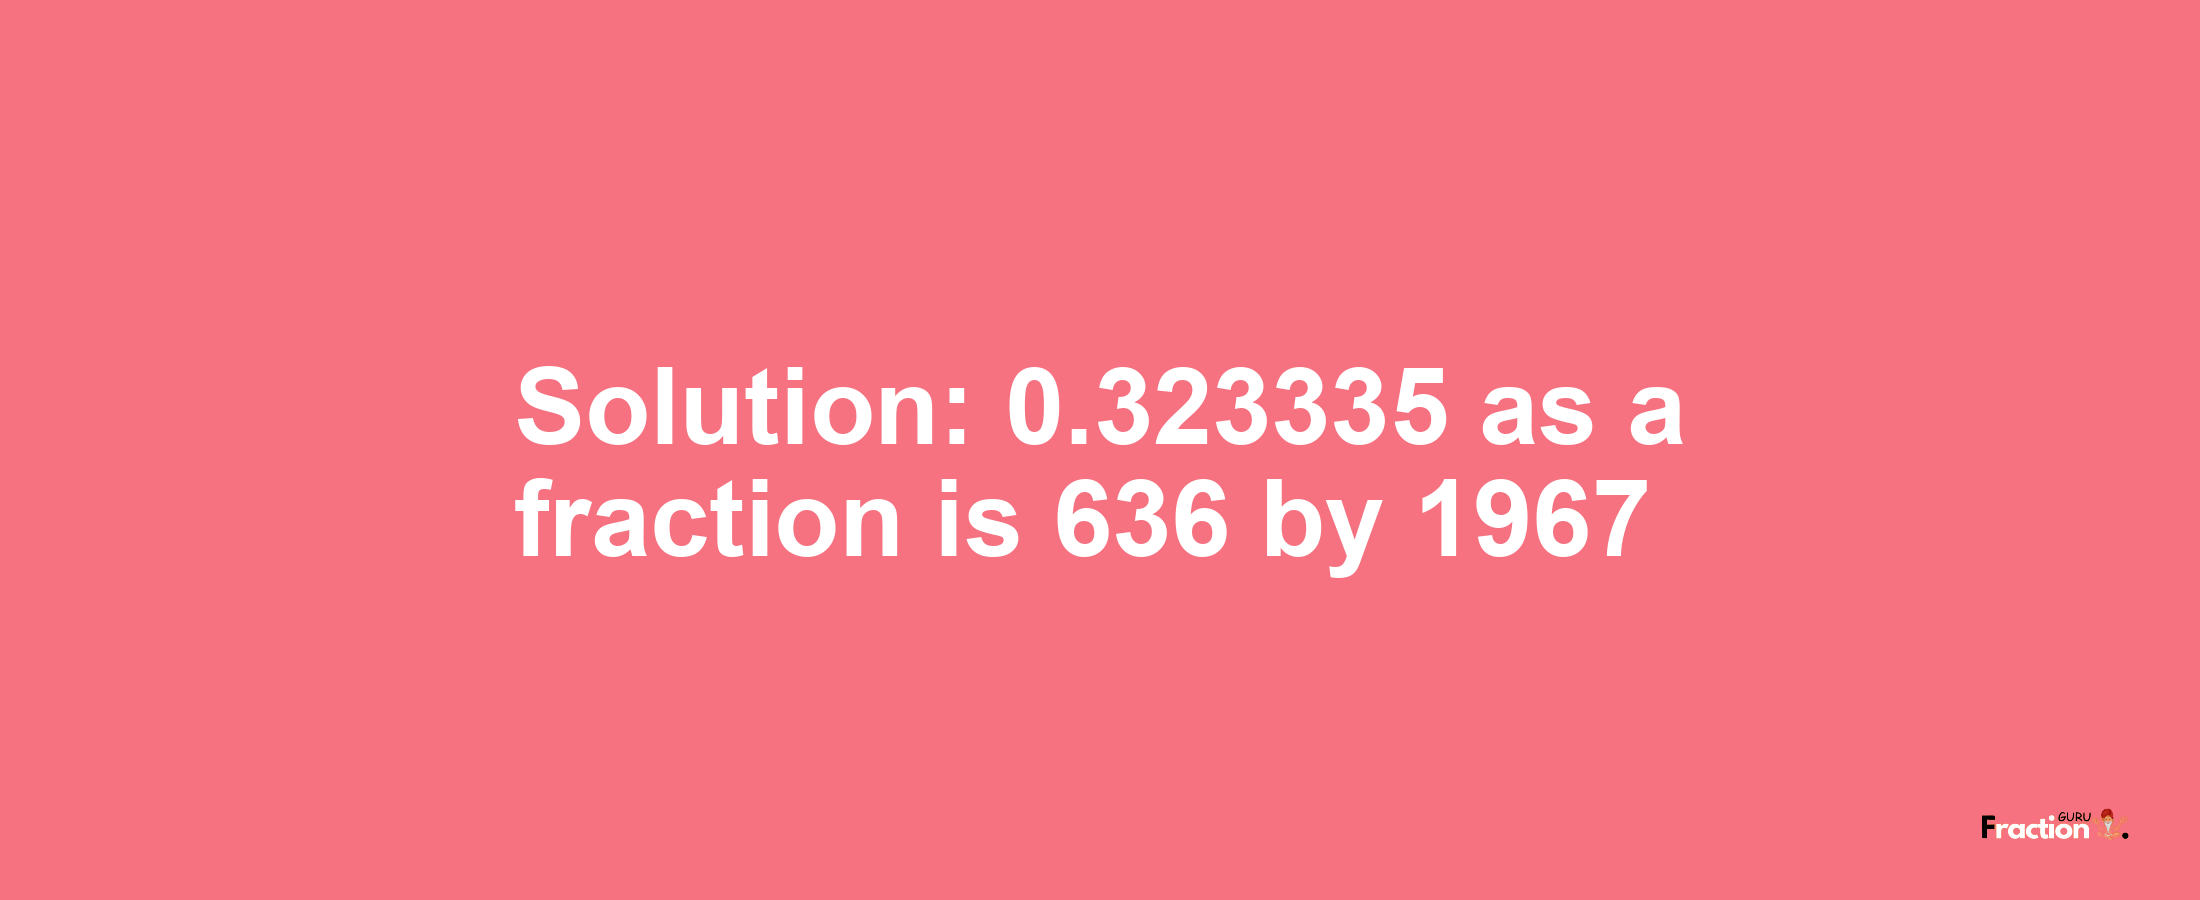 Solution:0.323335 as a fraction is 636/1967